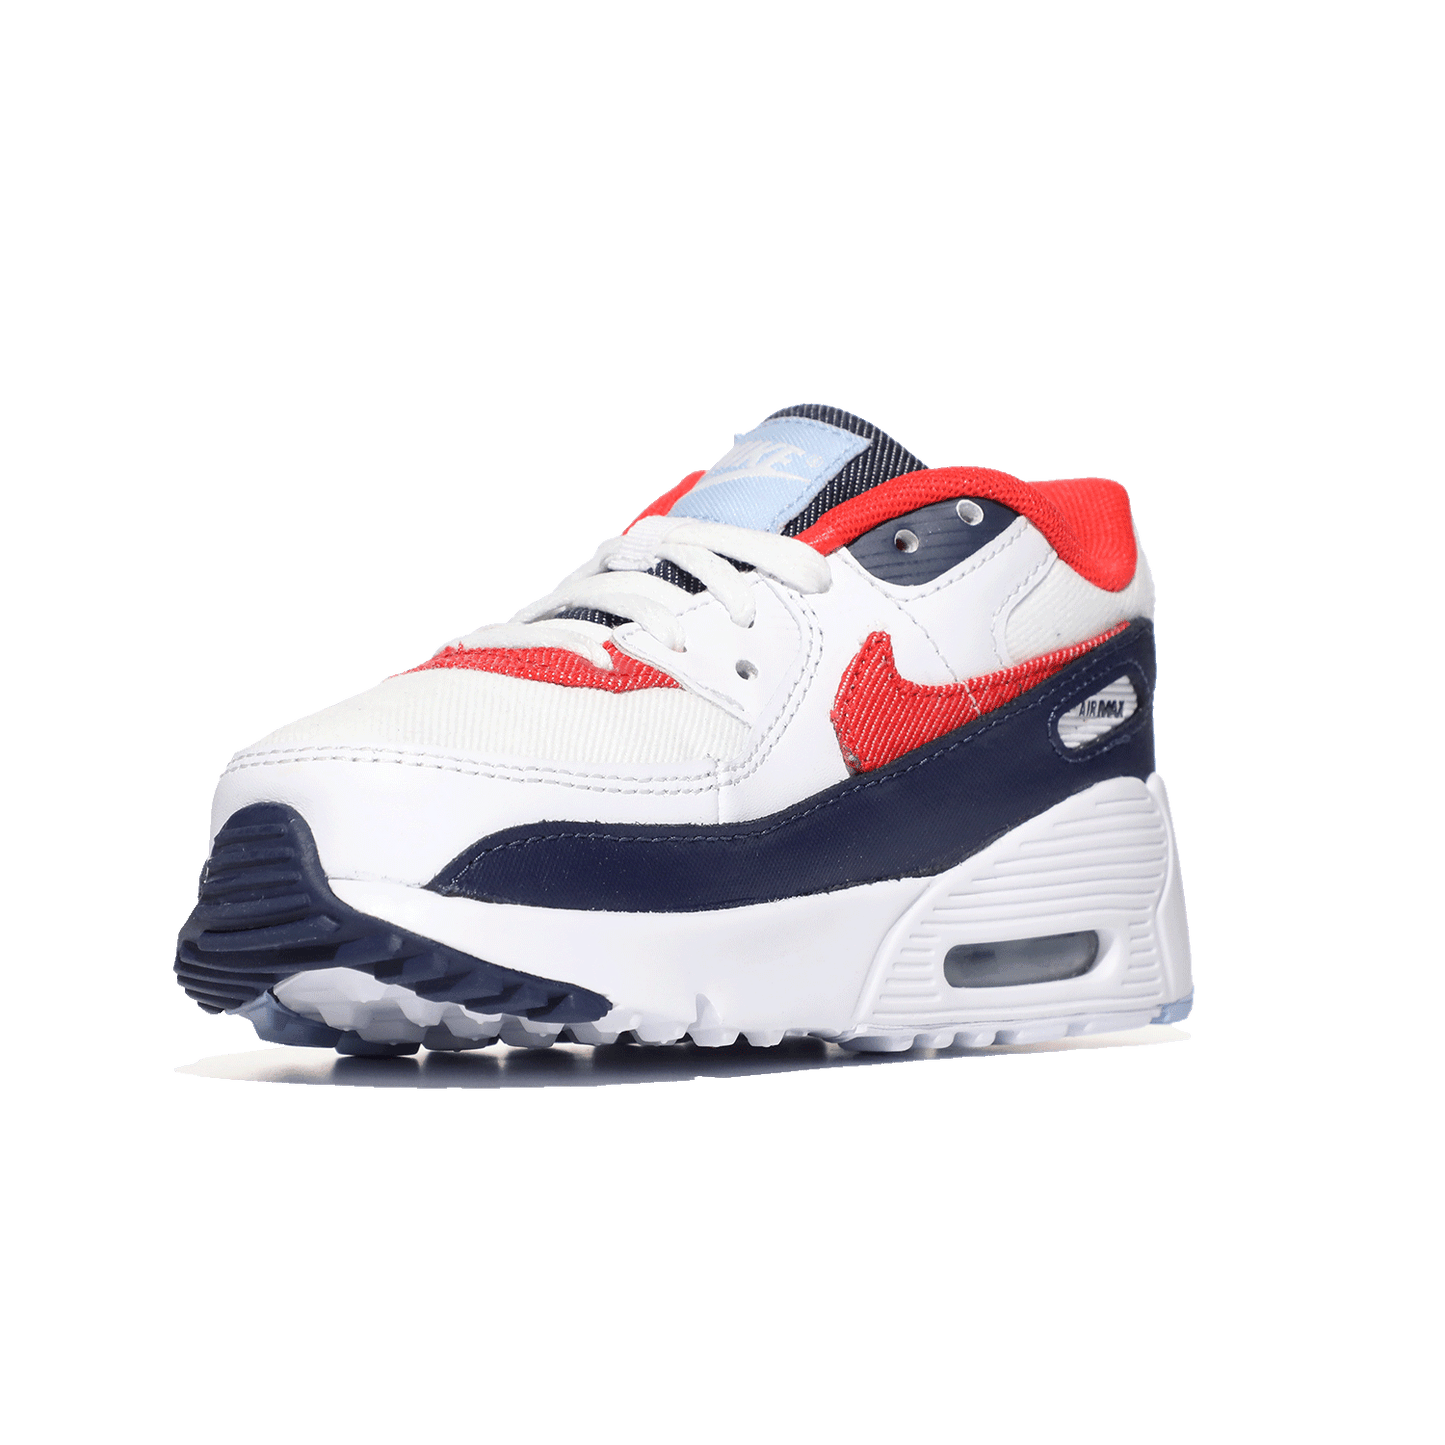 Image 5 of Air Max 90 (Infant/Toddler)